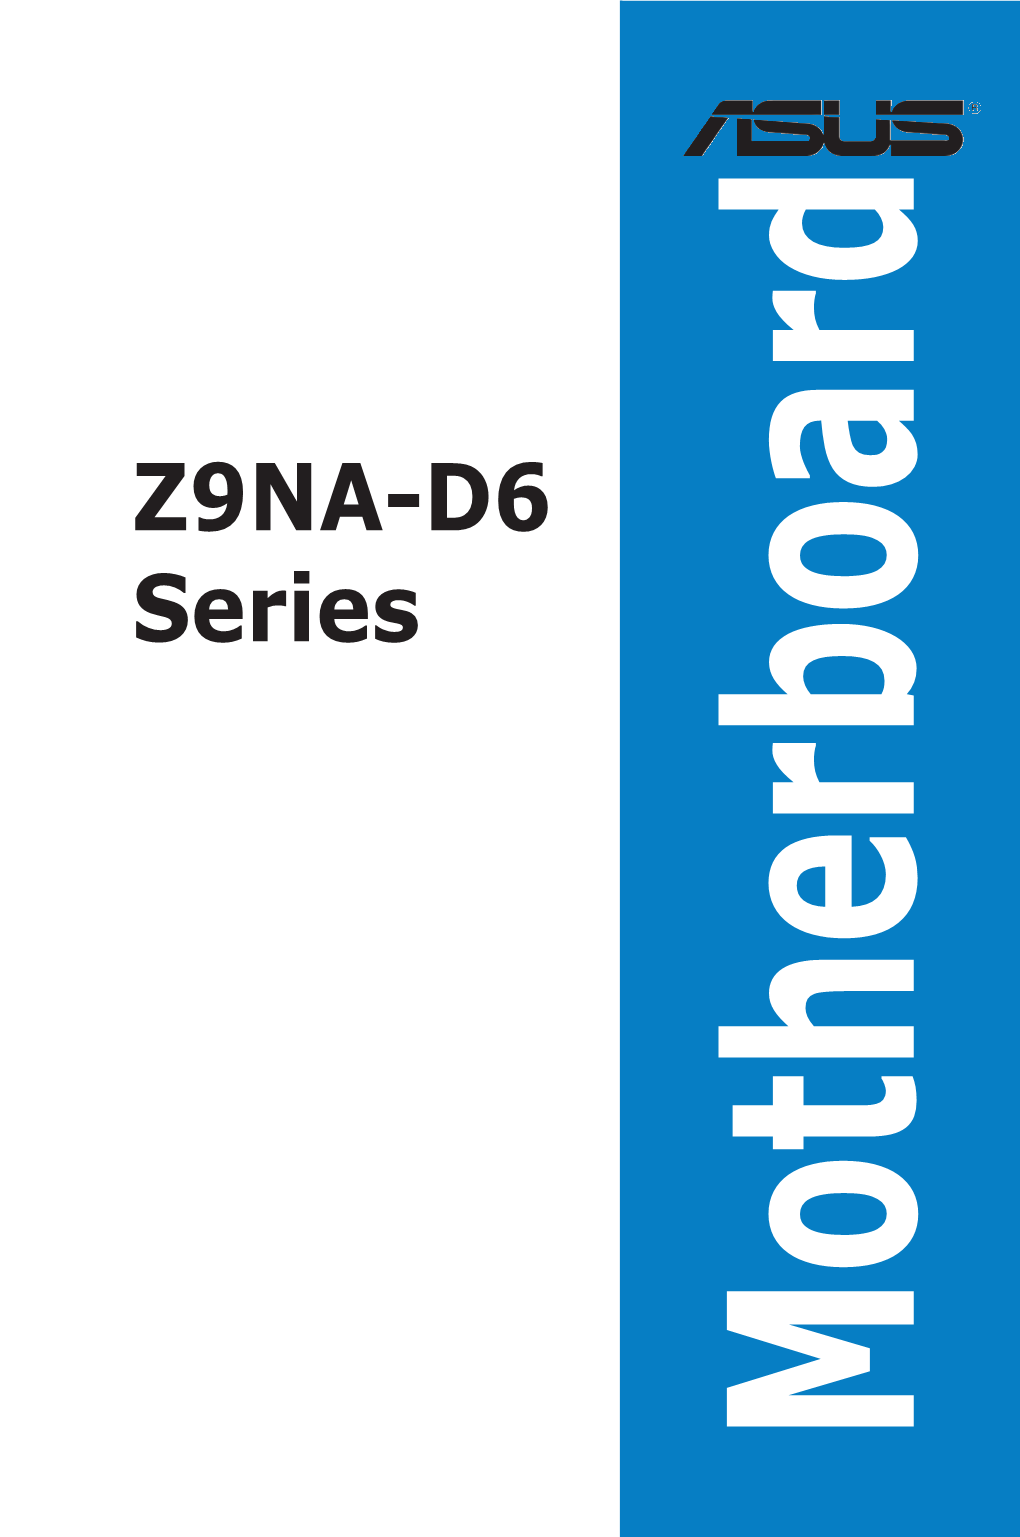 Z9NA-D6 Series Specifications Summary